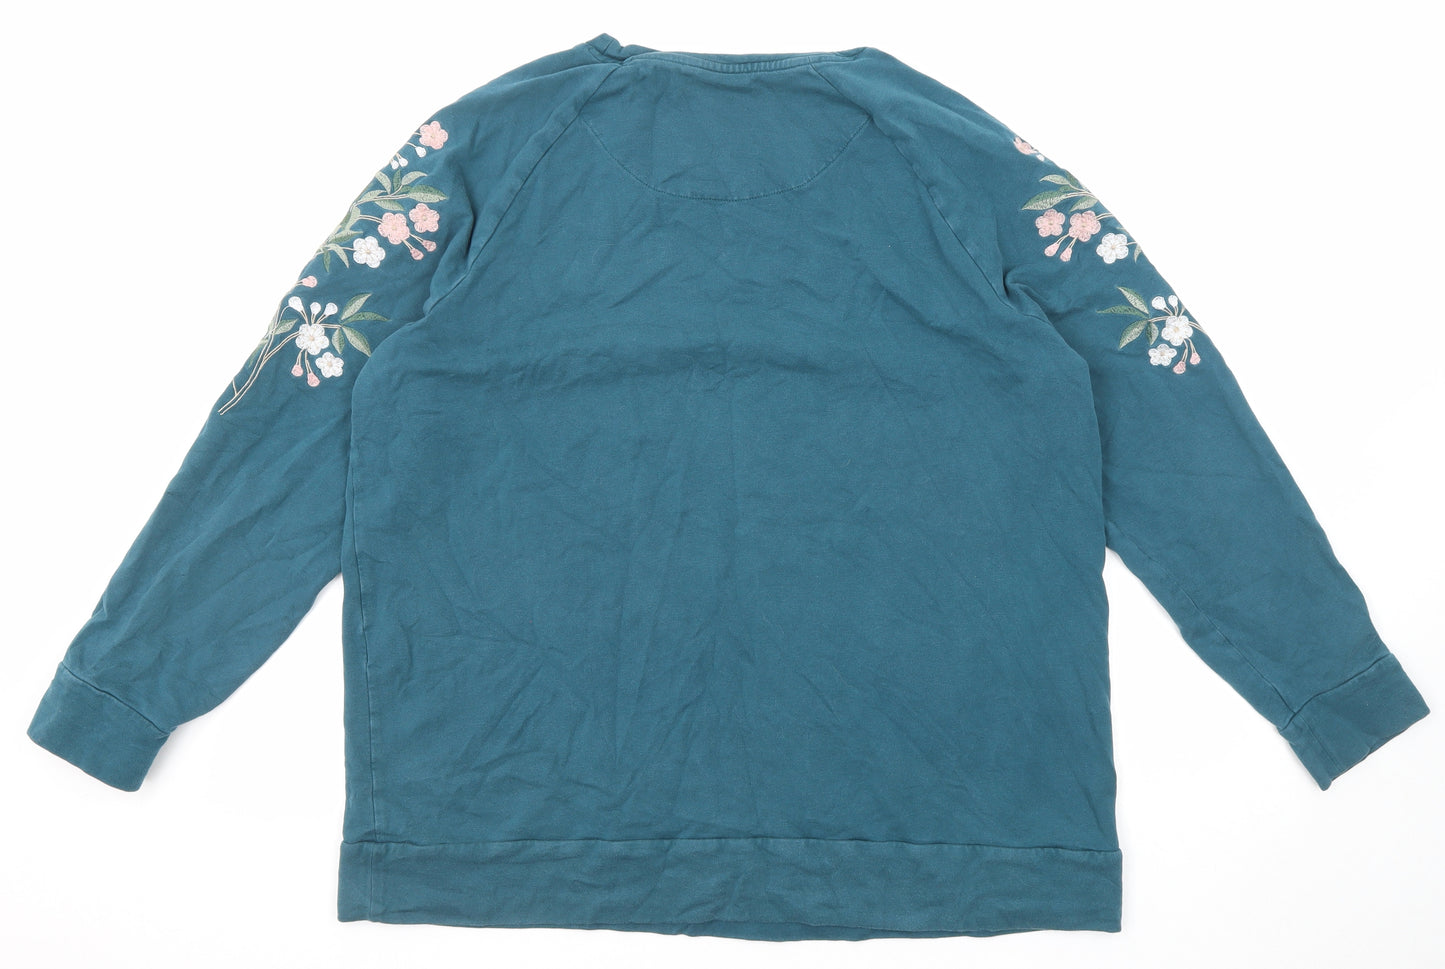 NEXT Womens Green Floral Cotton Pullover Sweatshirt Size 18 Pullover